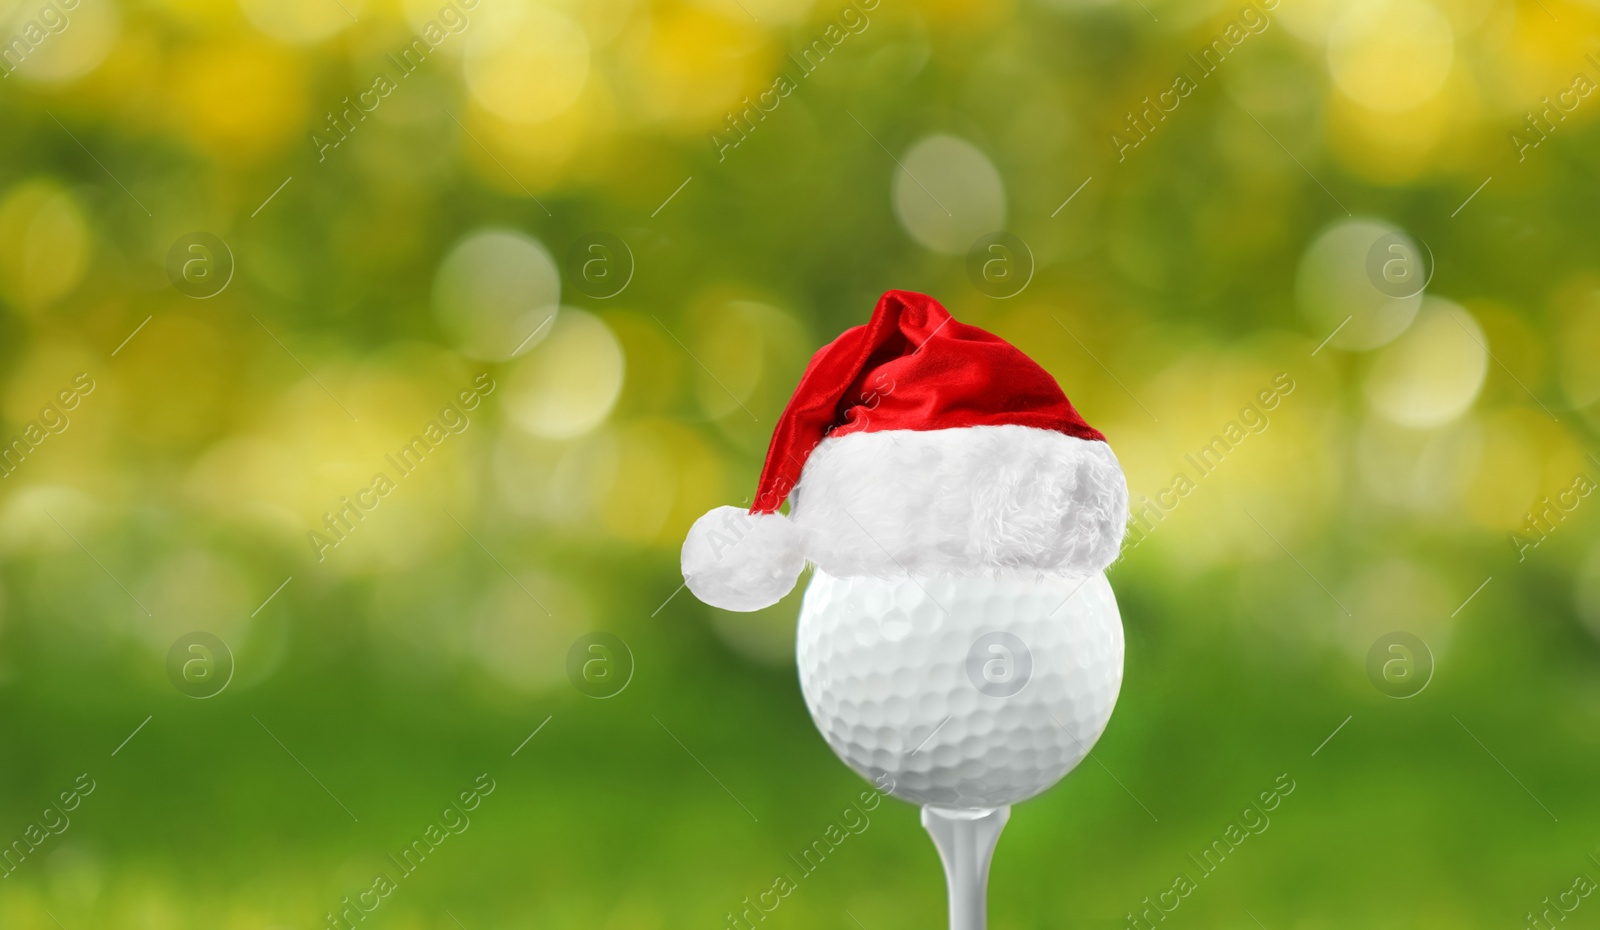 Image of Golf ball with small Santa hat on tee against blurred background